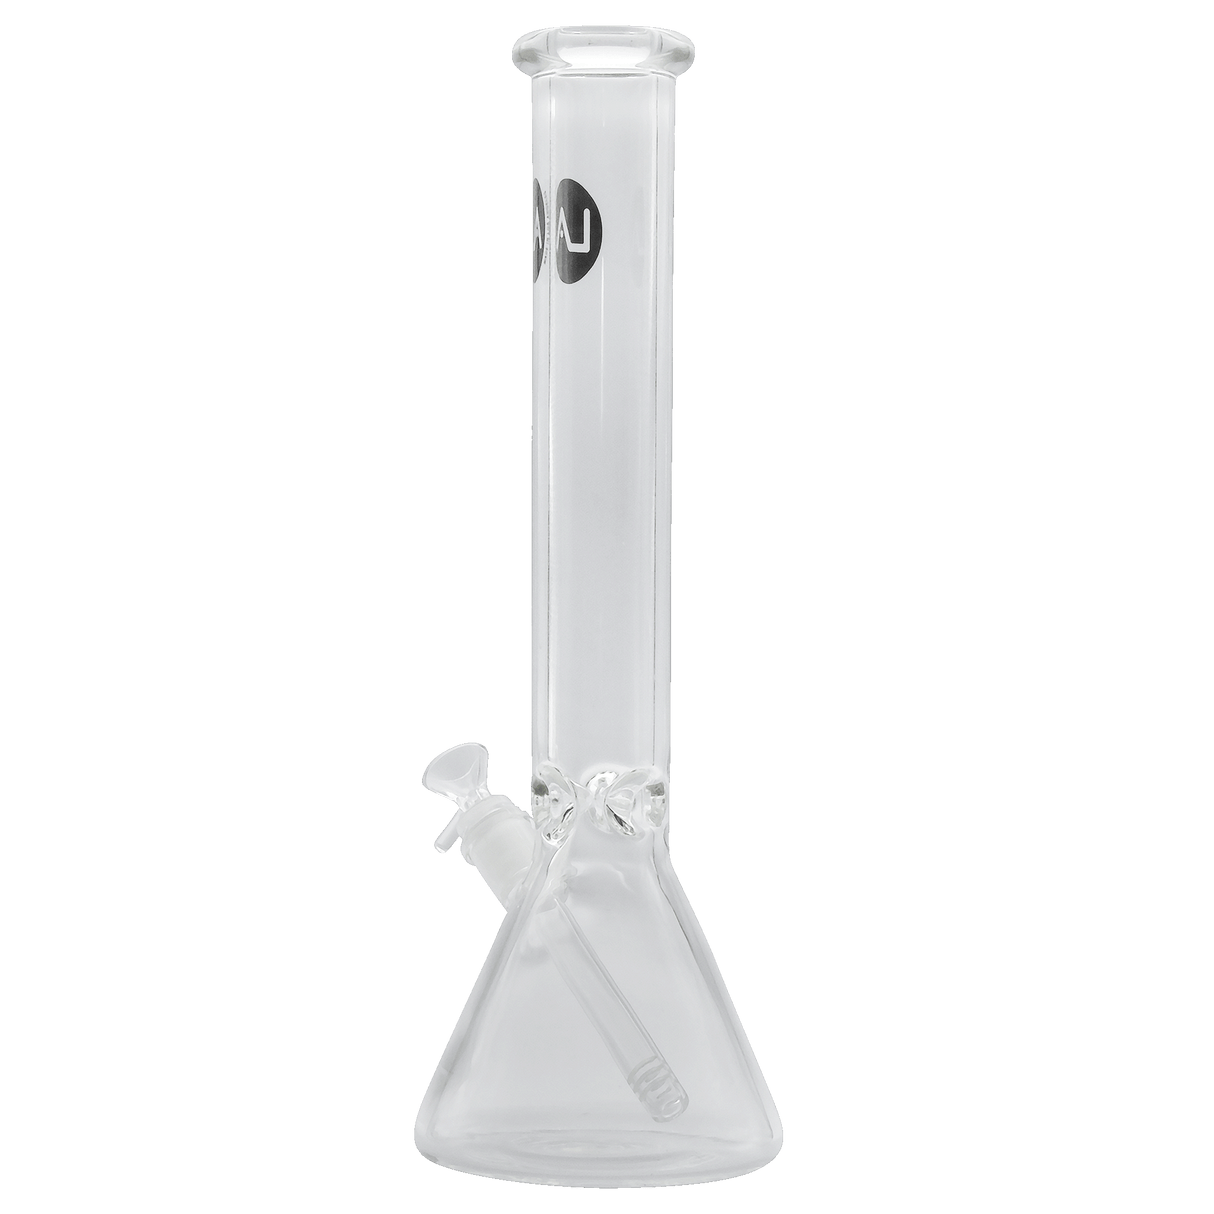 LA Pipes "Thicc Boy" 9mm Thick Beaker Bong with Heavy Wall Side View